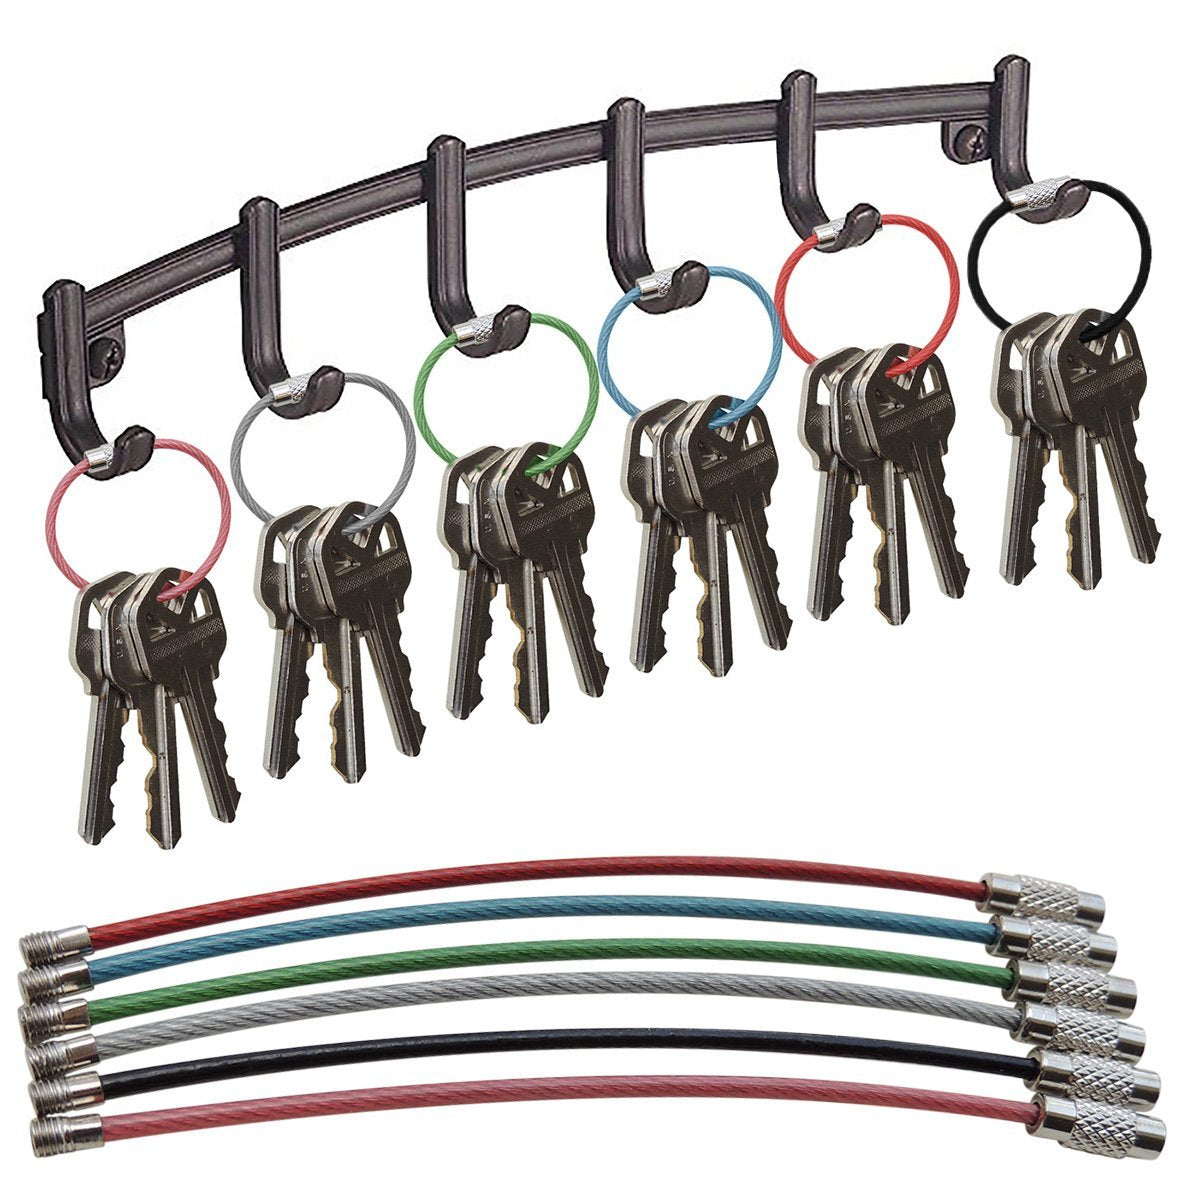 Wire Keyring – 12 Pack – 4 Inch Flexible Keychain with Plastic Coated Steel - RingBinderDepot.com